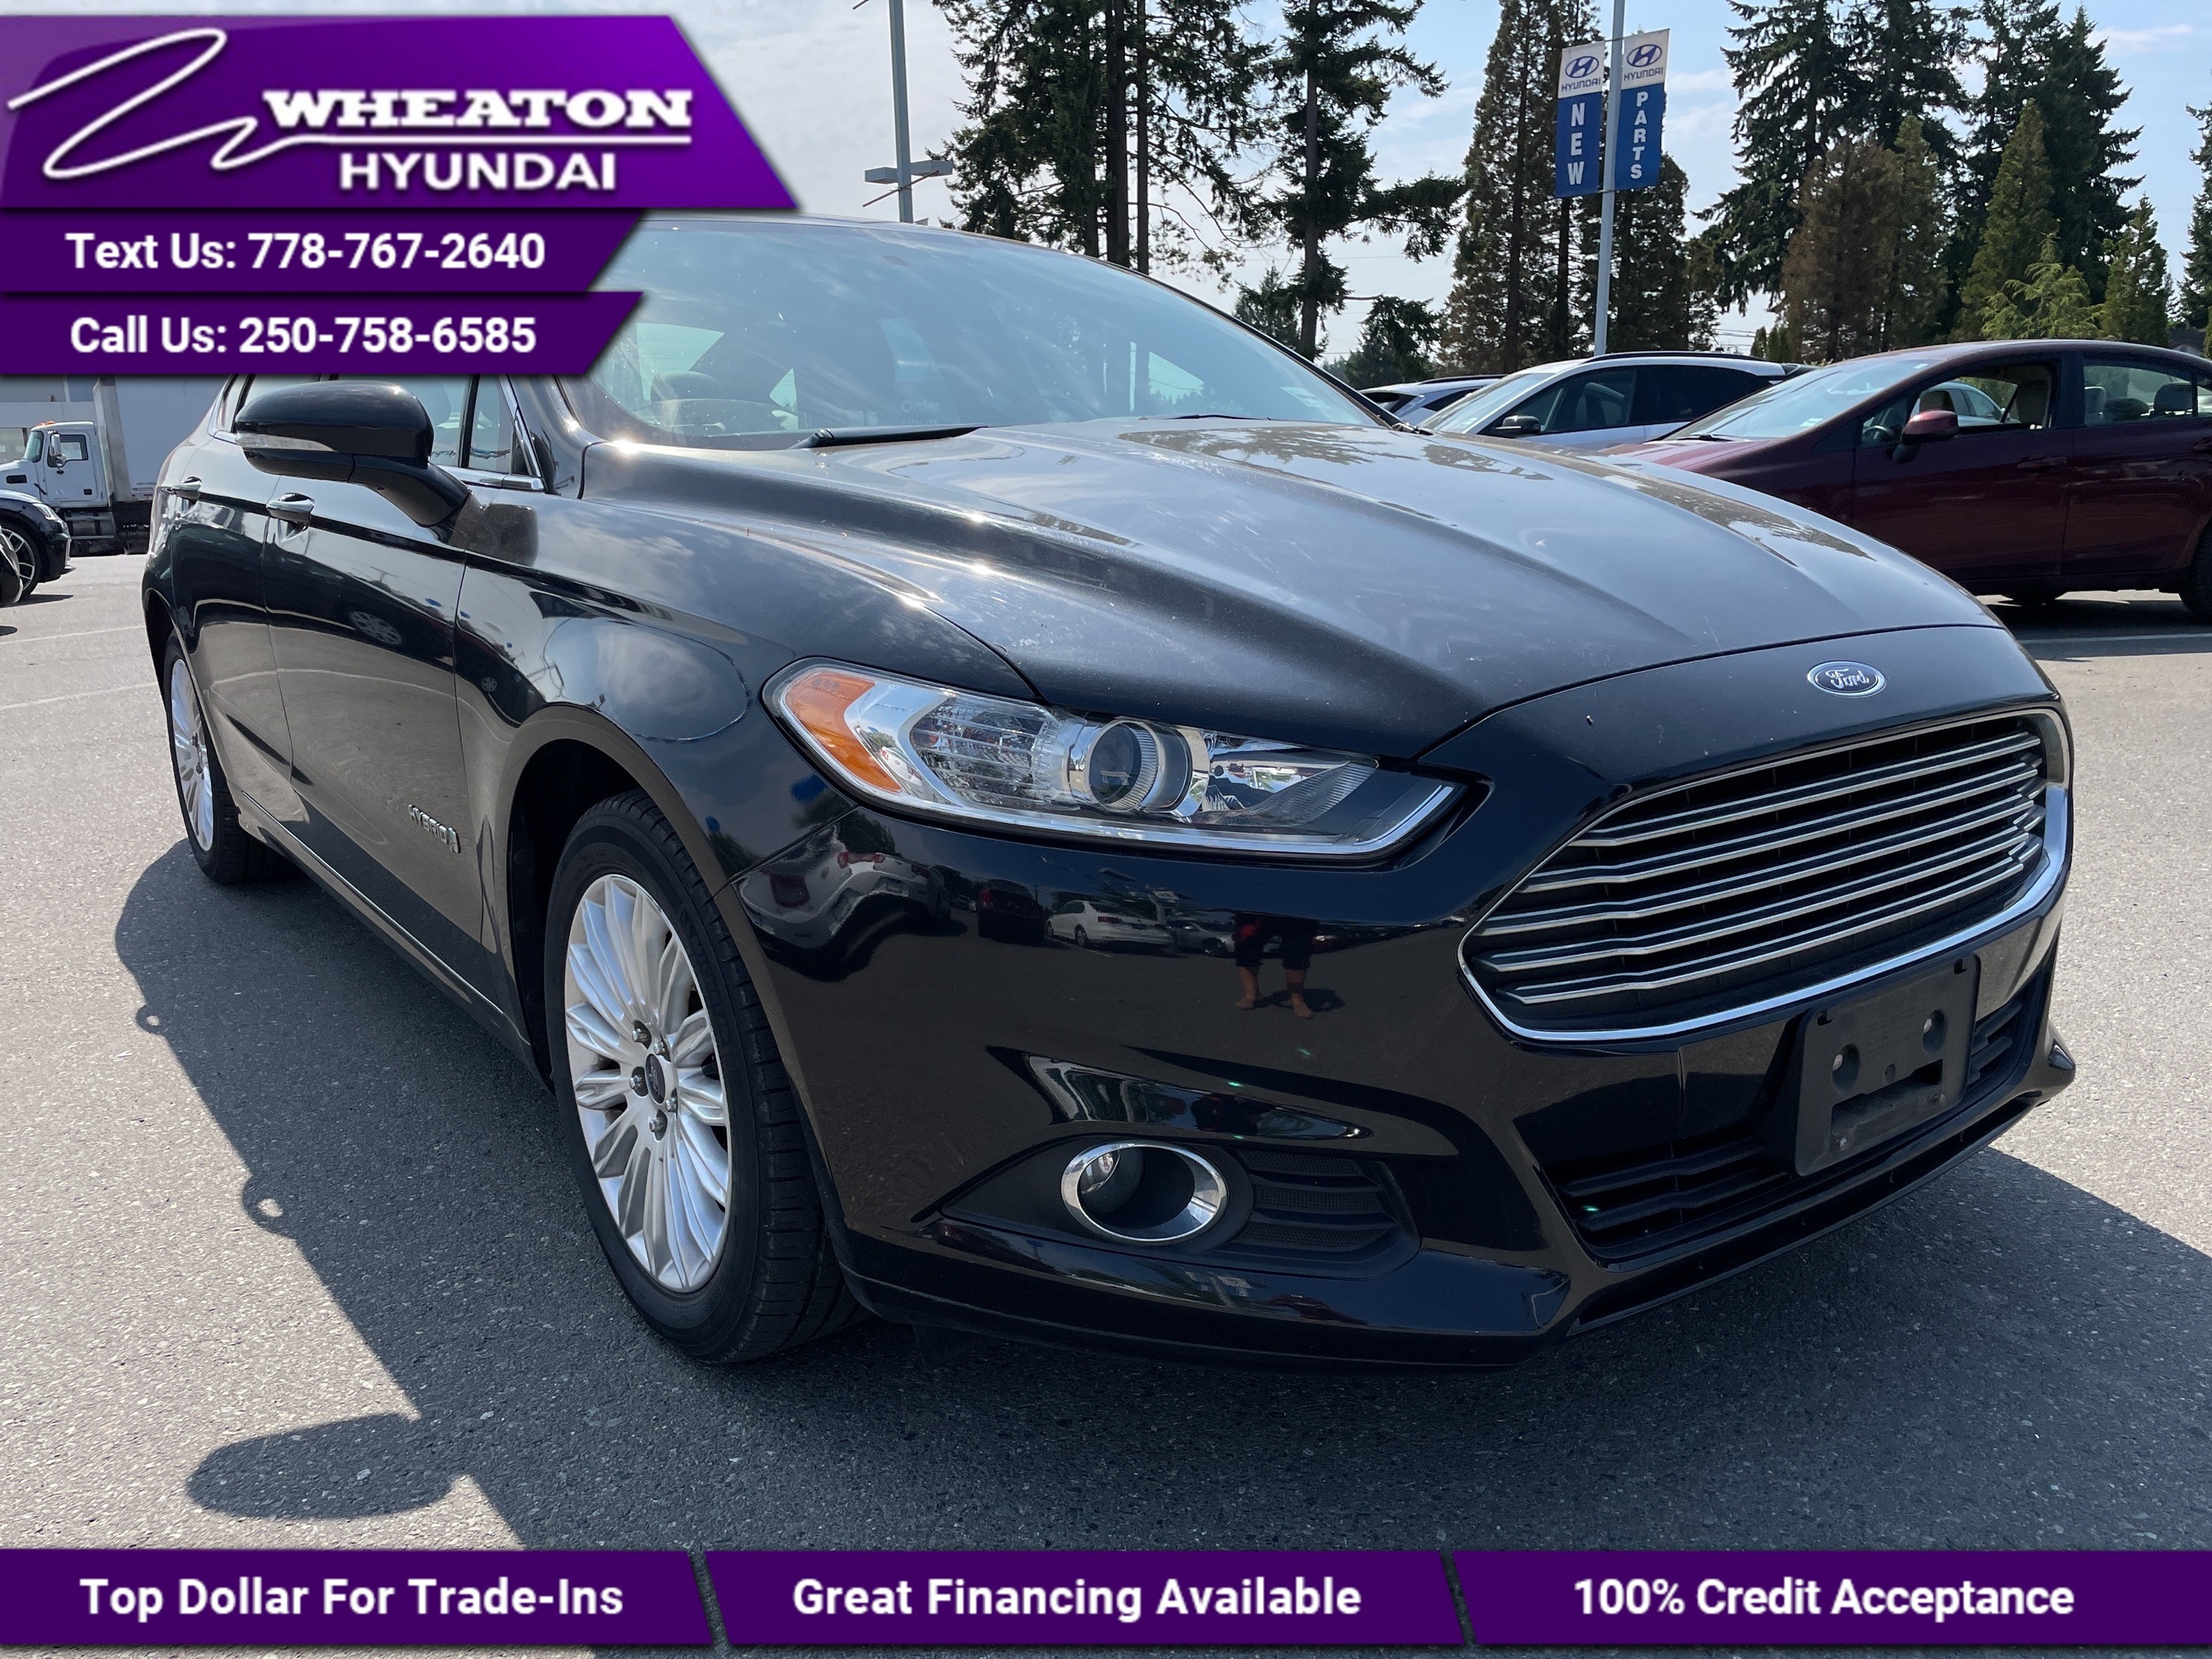 2014 Ford Fusion SE Hybrid, One Owner, No Accidents, Local, Trade i